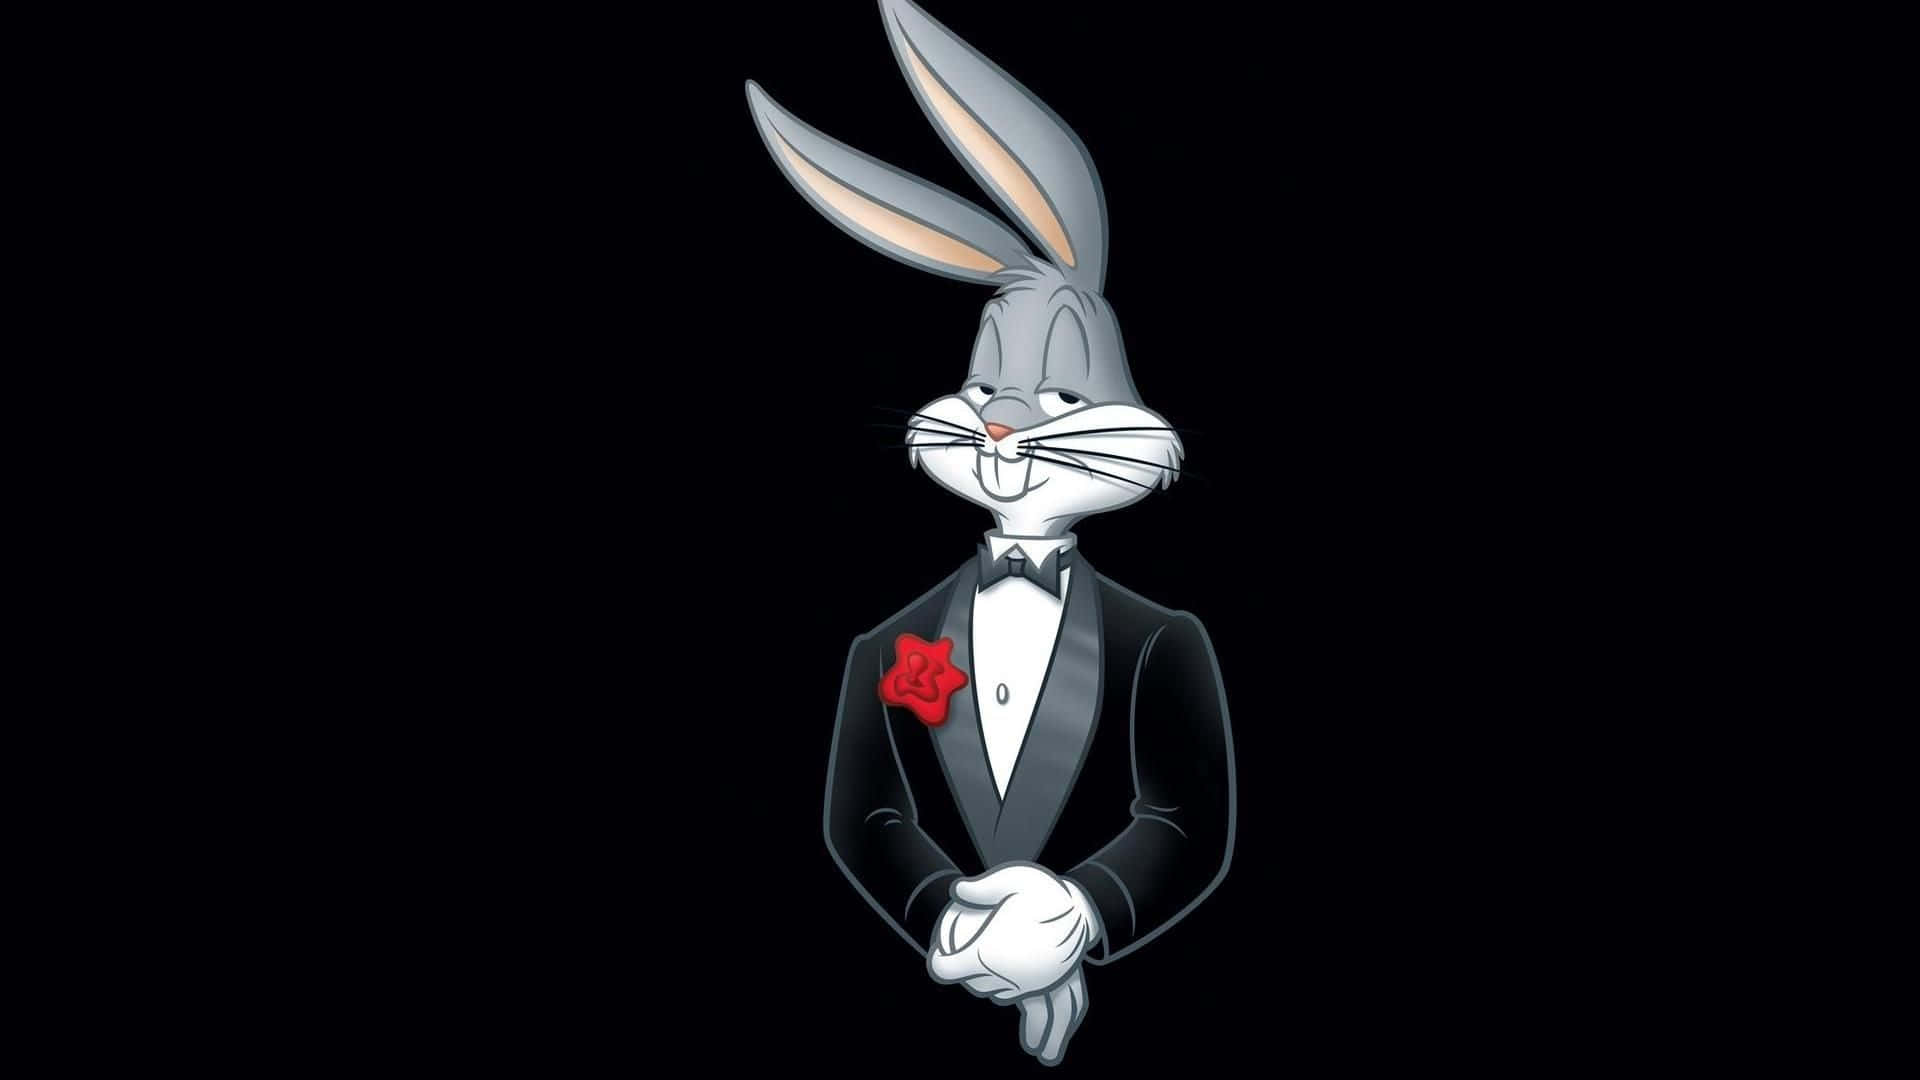 A classic Bugs Bunny to brighten up your day! Wallpaper